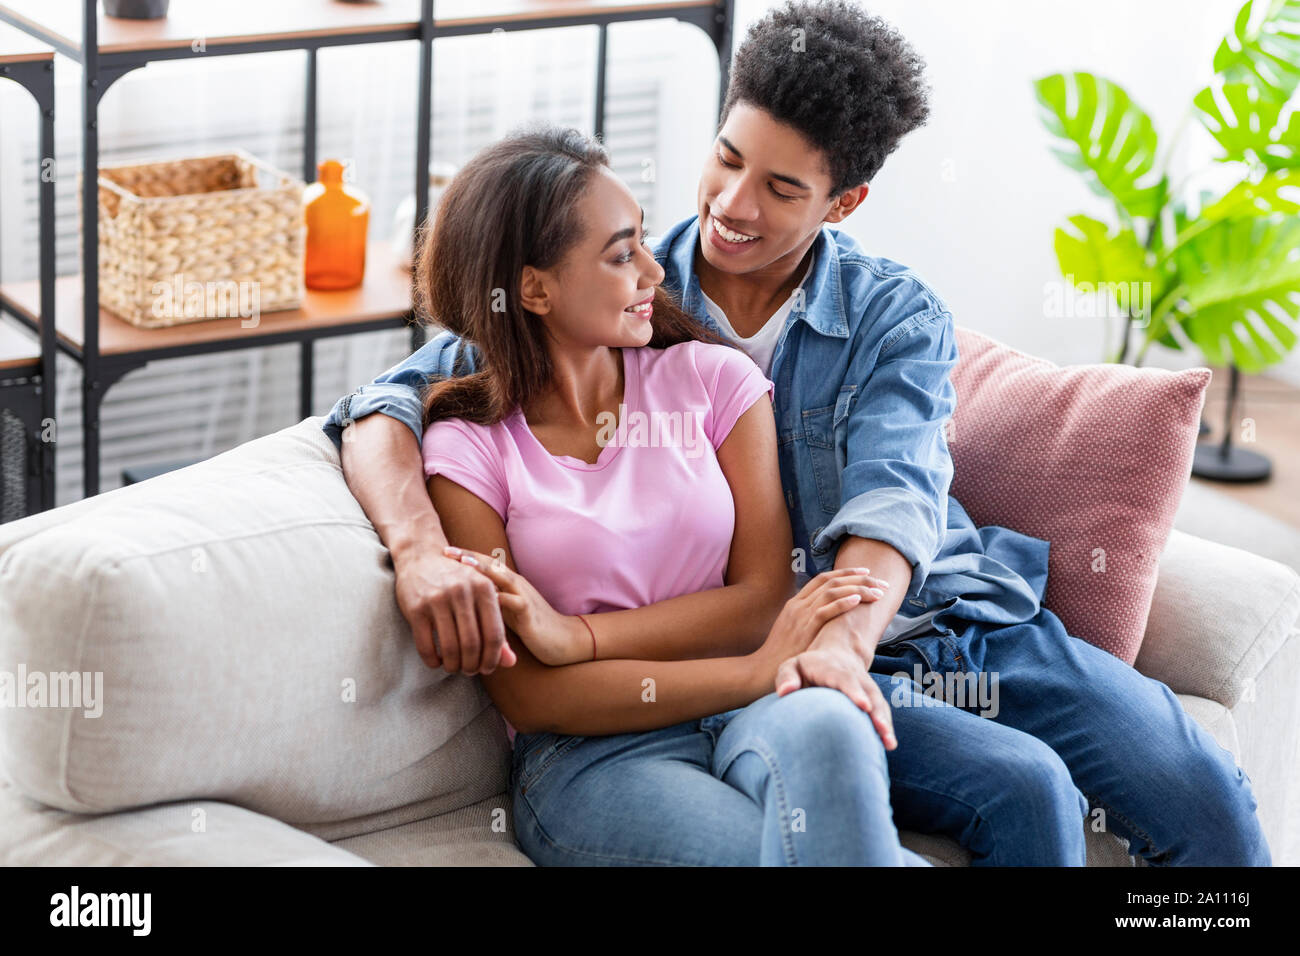 Smiling teenagers cuddling and glancing to each other at home Stock Photo